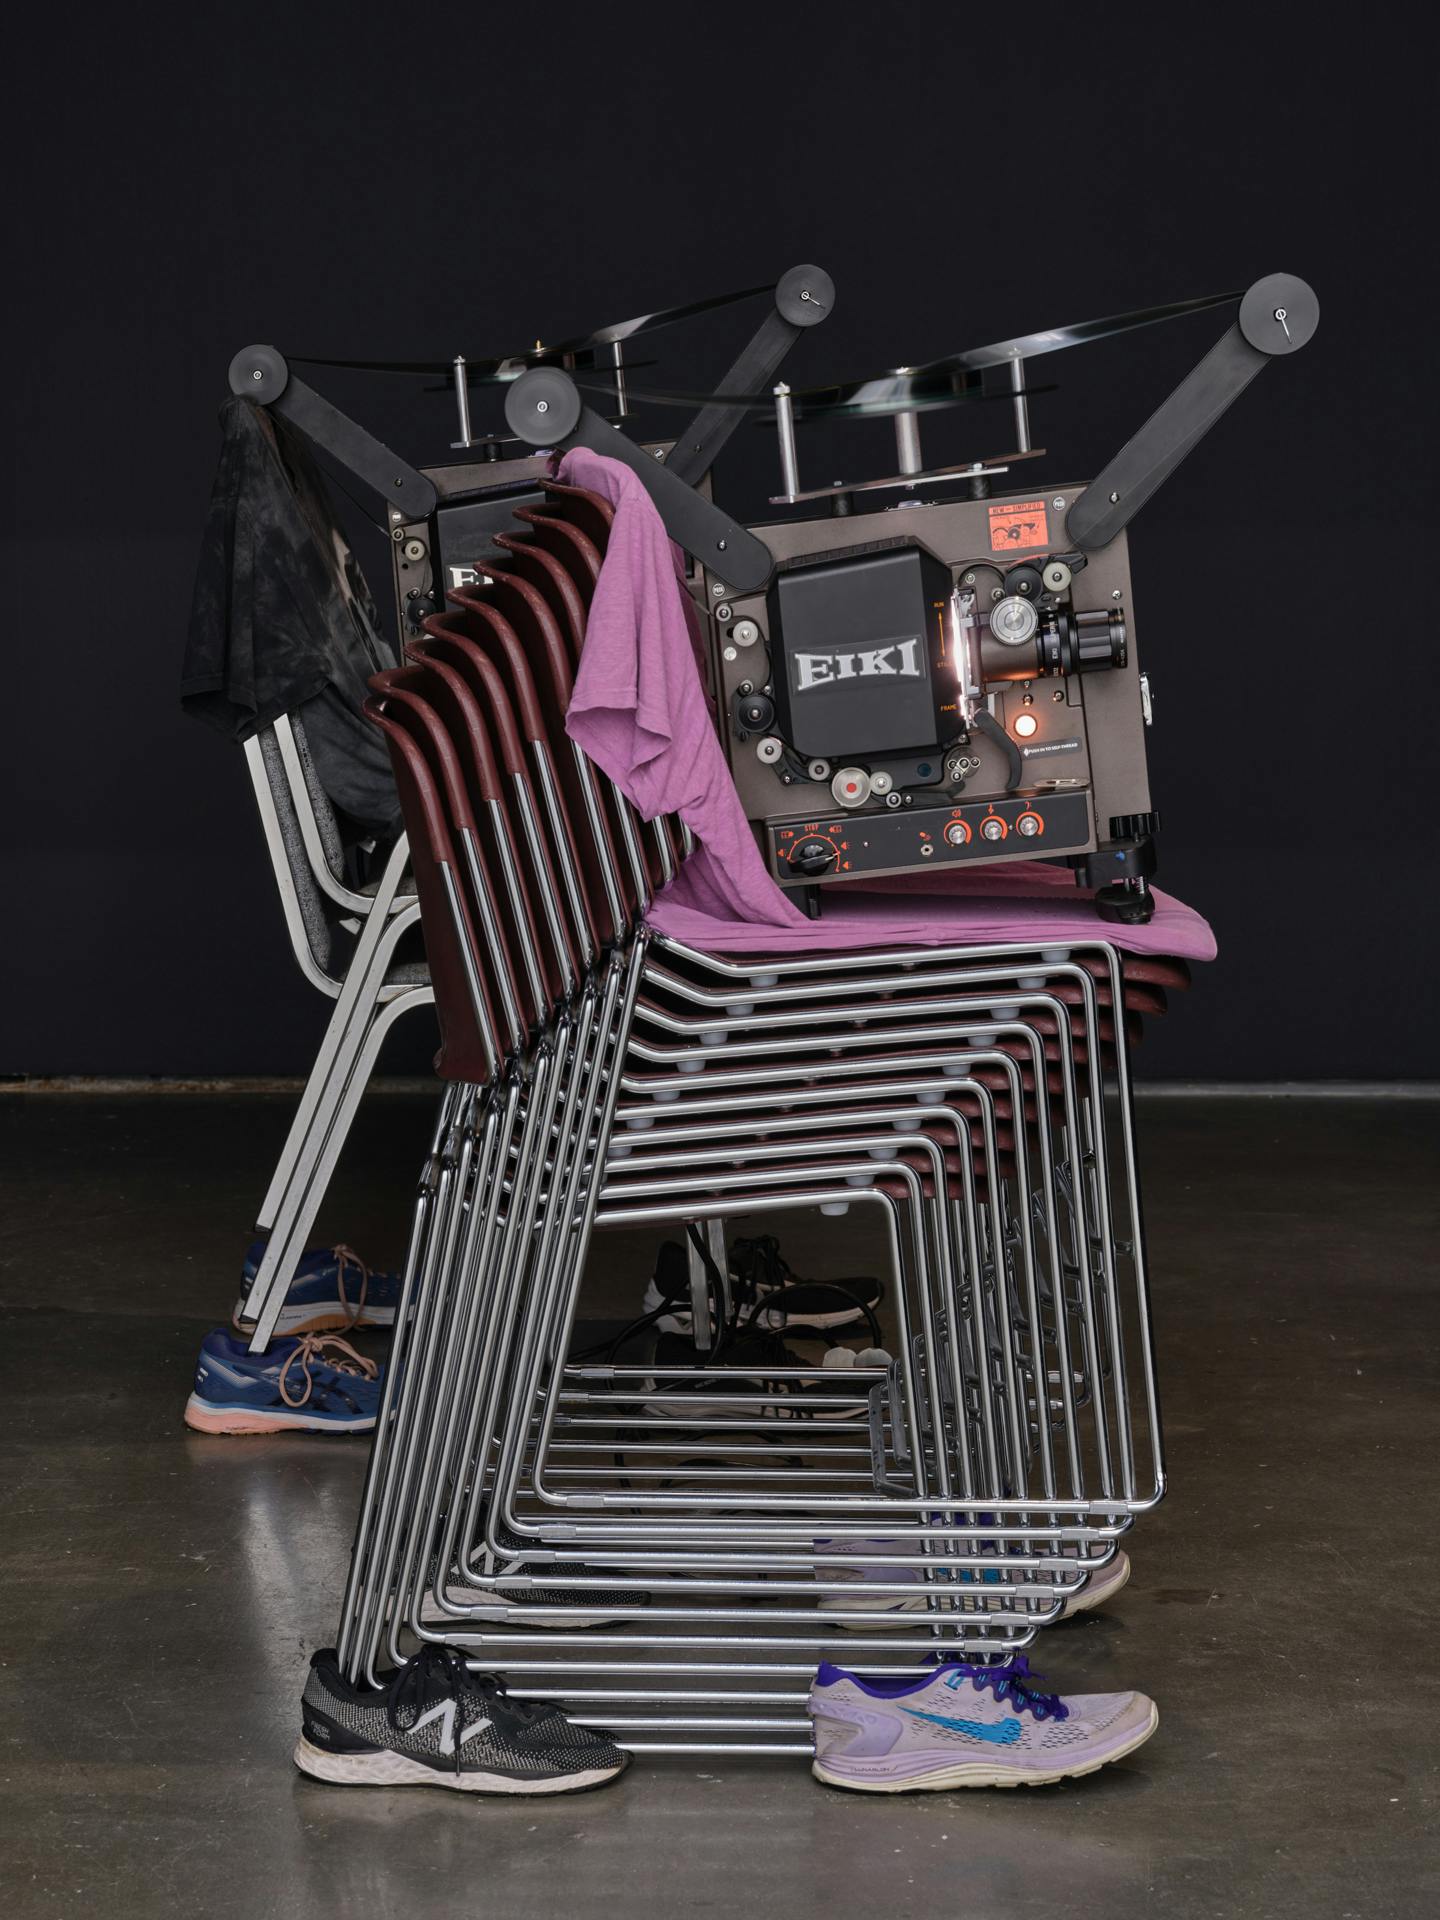 A sculpture made of stacked chairs supporting a film projector. A pink t-shirt lines the top chair that the projector sits on, and runnings shoes support the bottom chair.